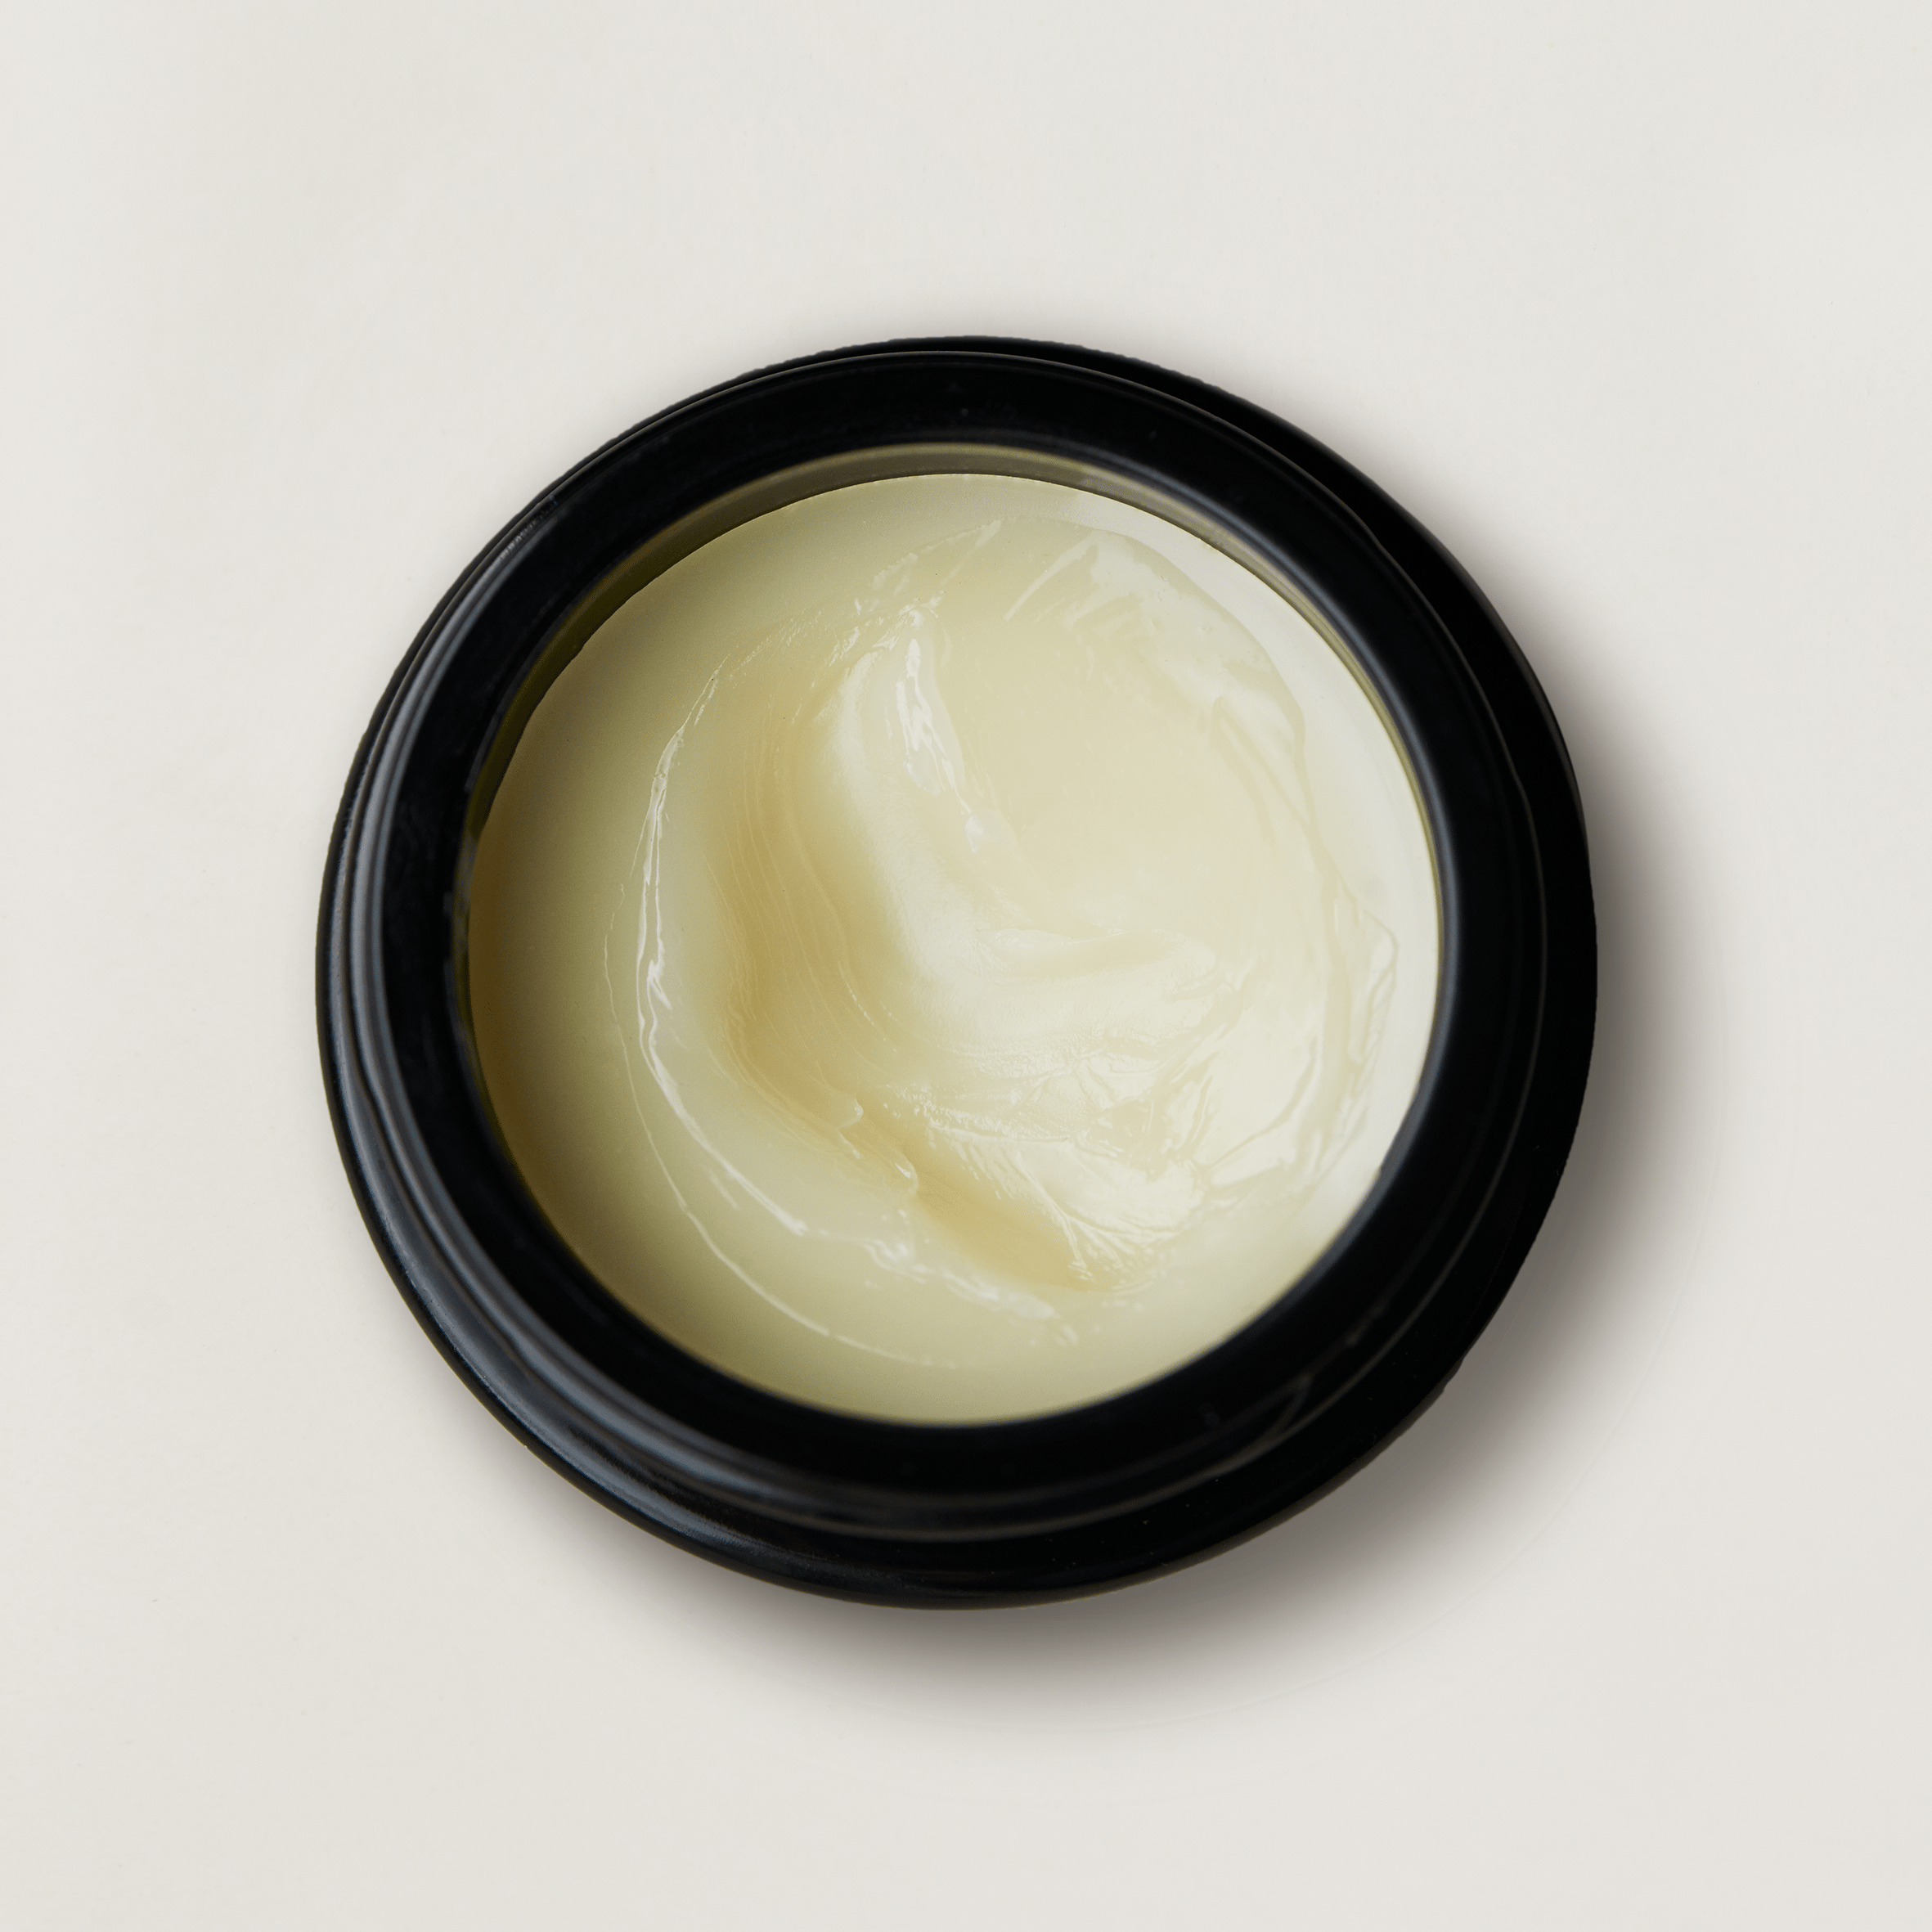 Super Size - Essential Face Balm (Worth £300) - Slow Ageing Essentials Slow Ageing Essentials